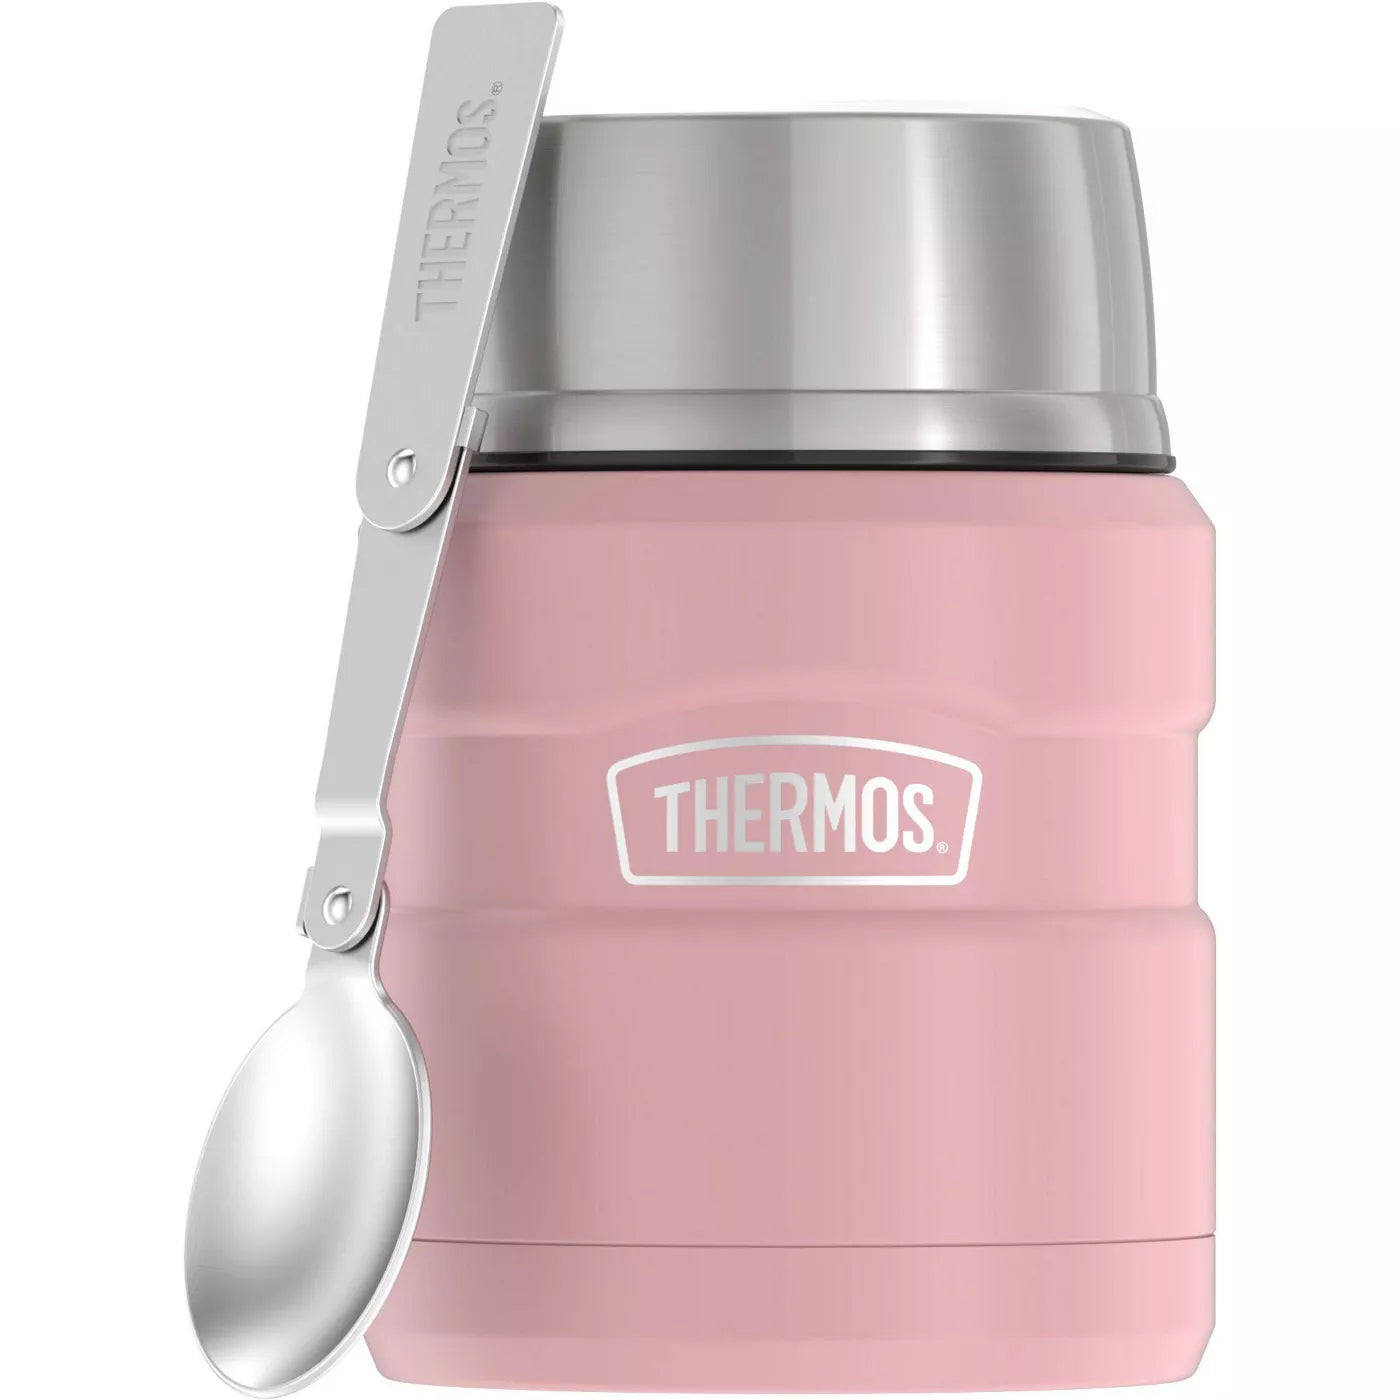  DaCool Thermos for Hot Food Insulated Food Jar 16